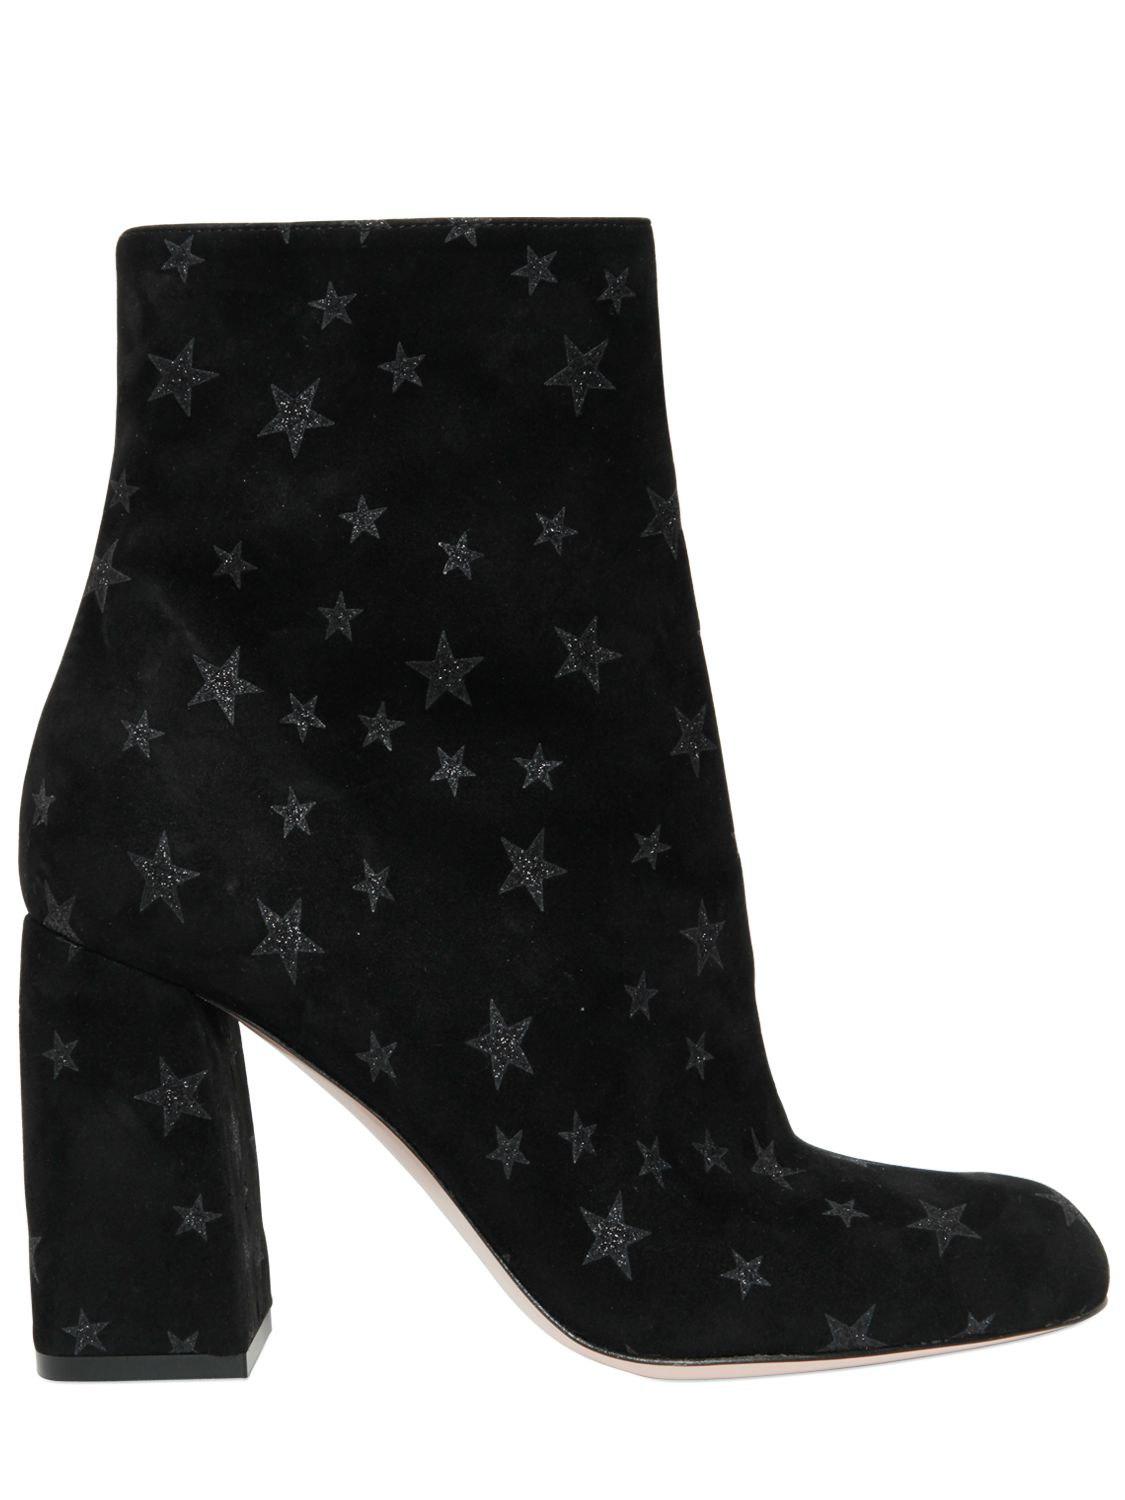 RED Valentino Suede Star-embellished Ankle Boots in Black | Lyst